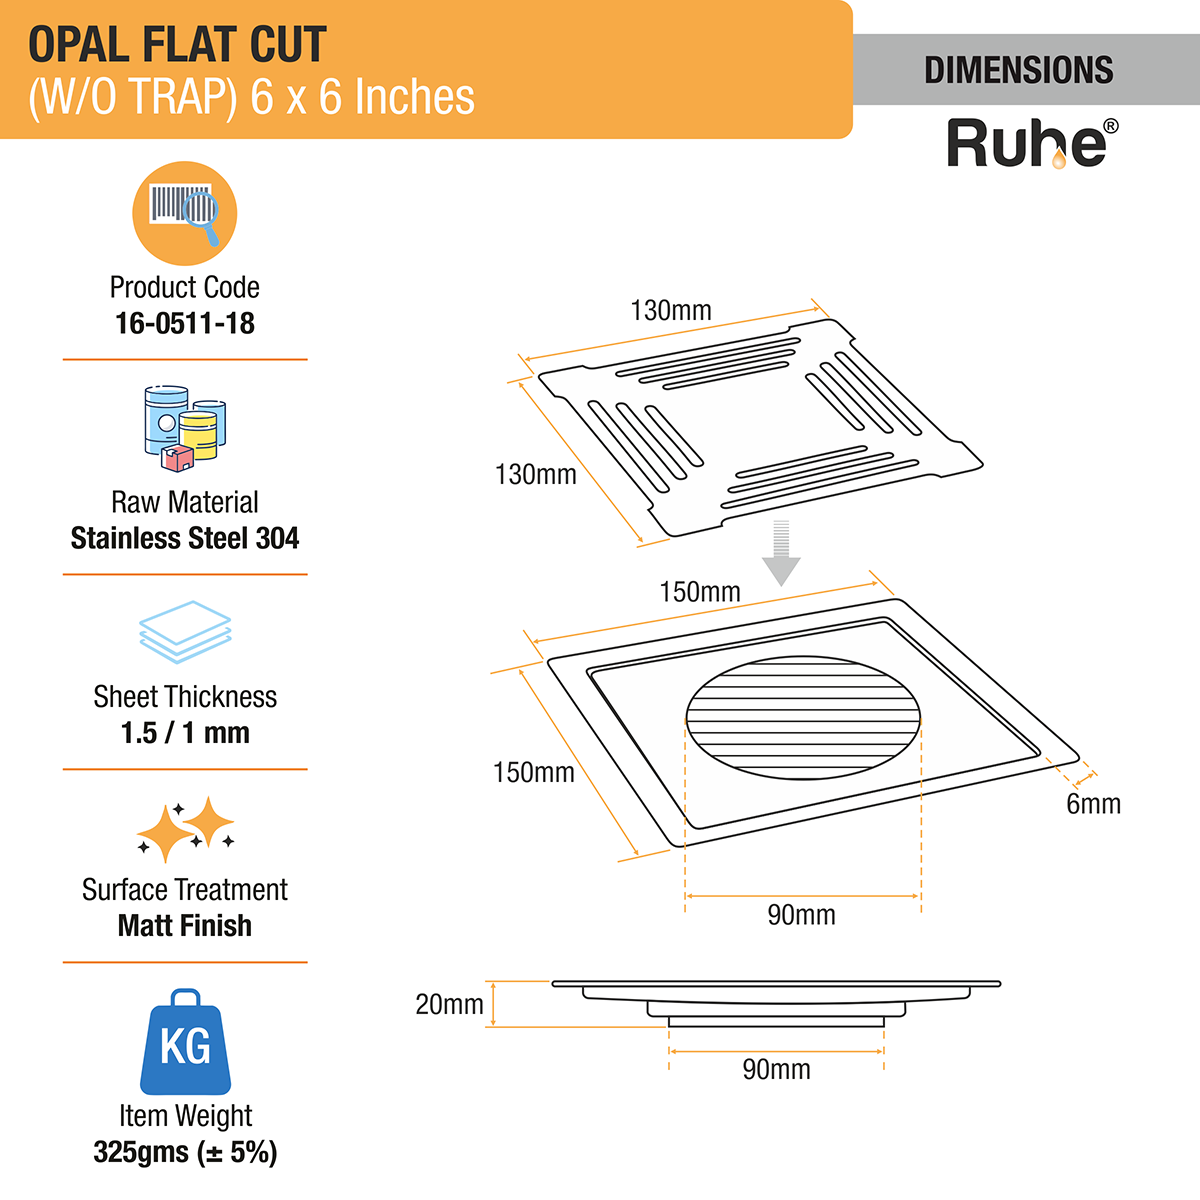 Opal Square Flat Cut 304-Grade Floor Drain (6 x 6 Inches) dimensions and sizes